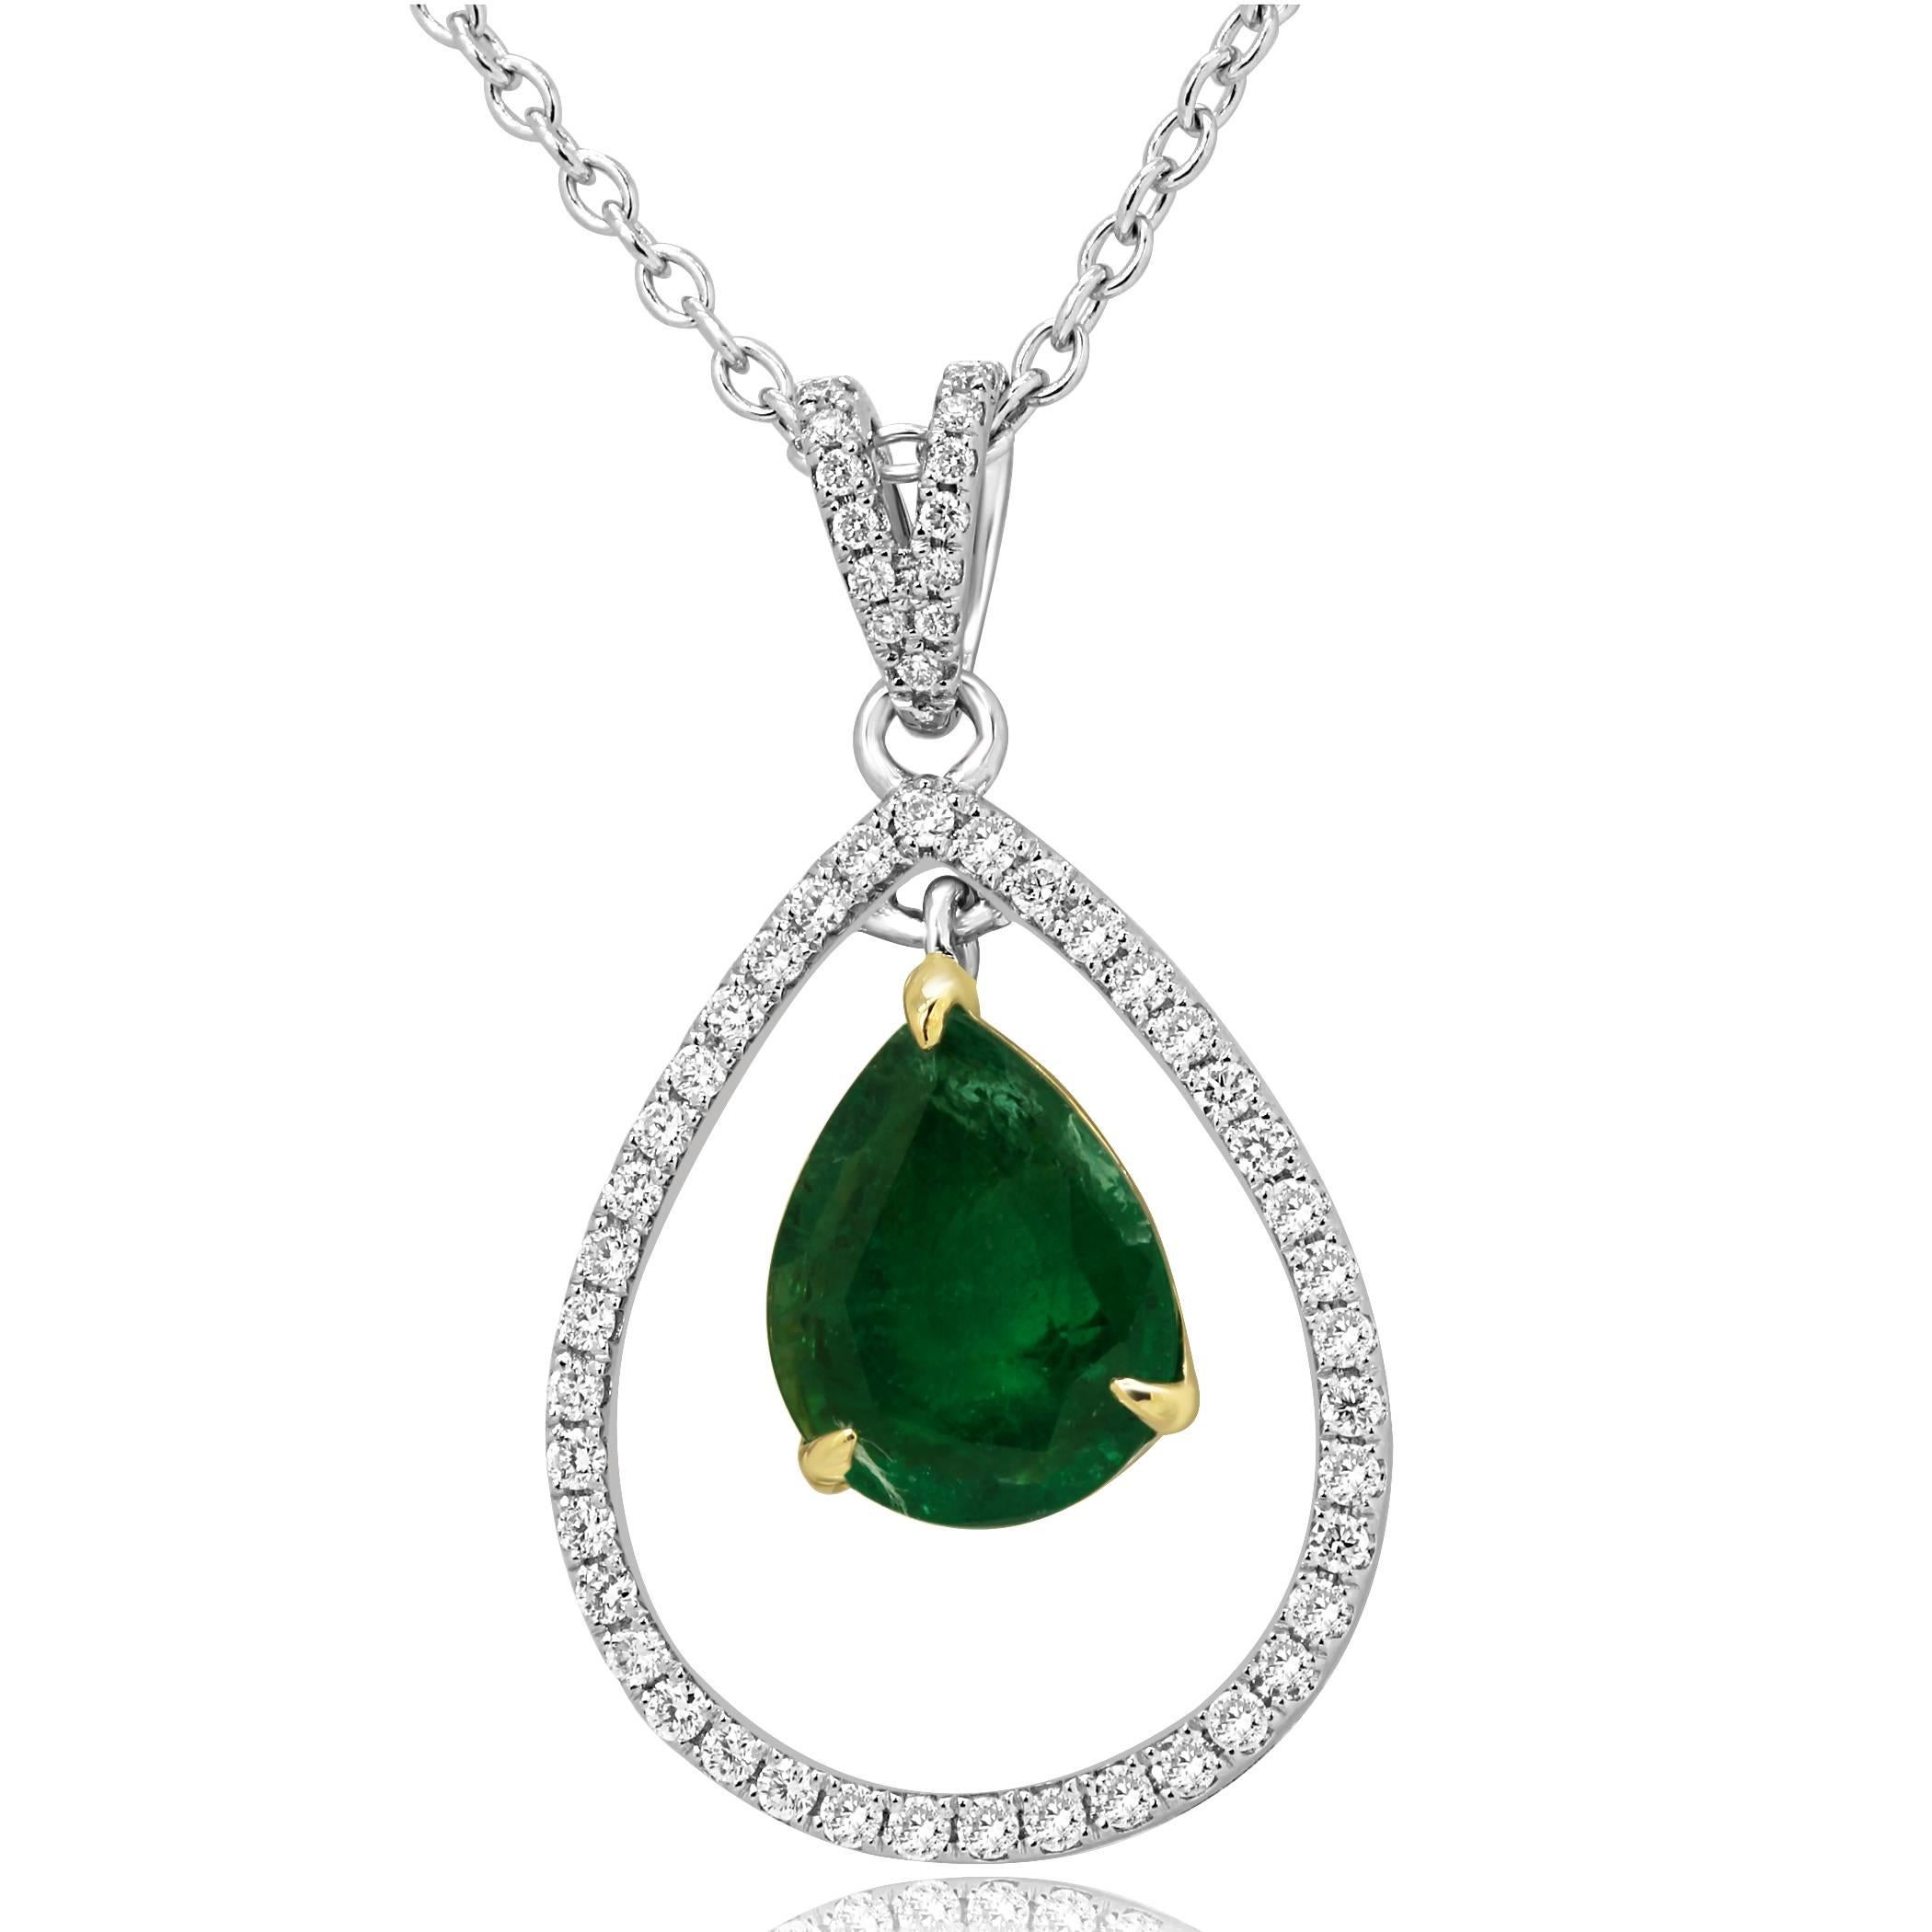 Stunning Zambian Emerald Pear shape 1.75 Carat encircled in a halo of White Round Diamonds 0.37 Carat in 14K White and Yellow Gold Chain Necklace.

Style available in different price ranges. Prices are based on your selection of 4C's Cut, Color,